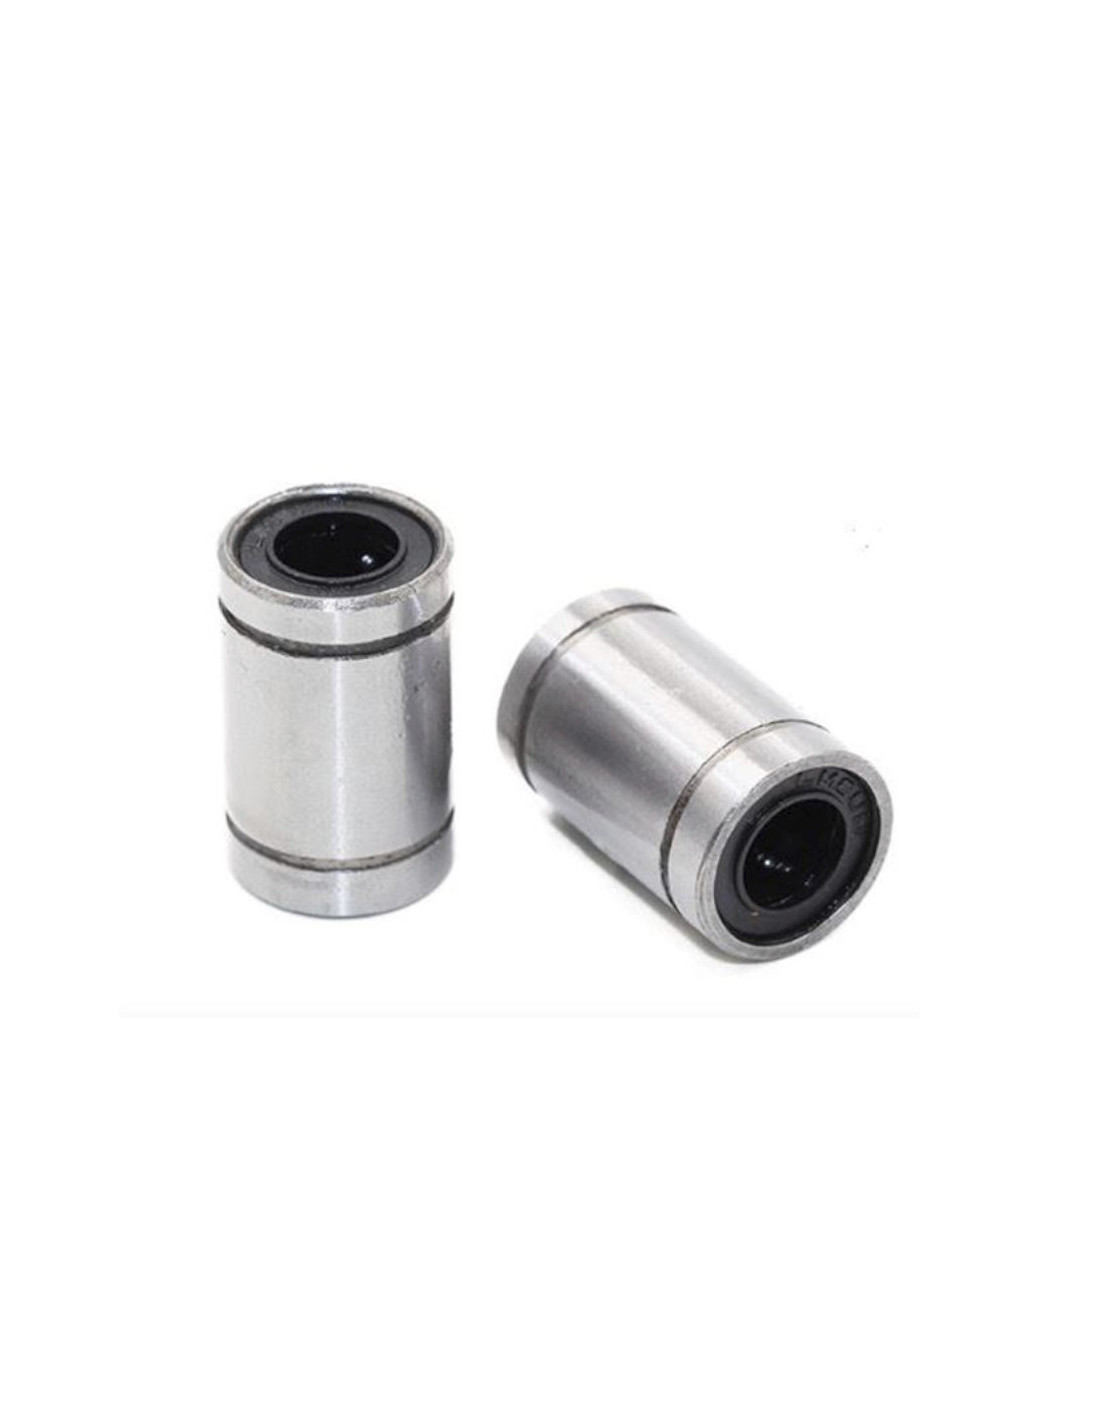 Steel bearing for CNC 12mm, 1pc.